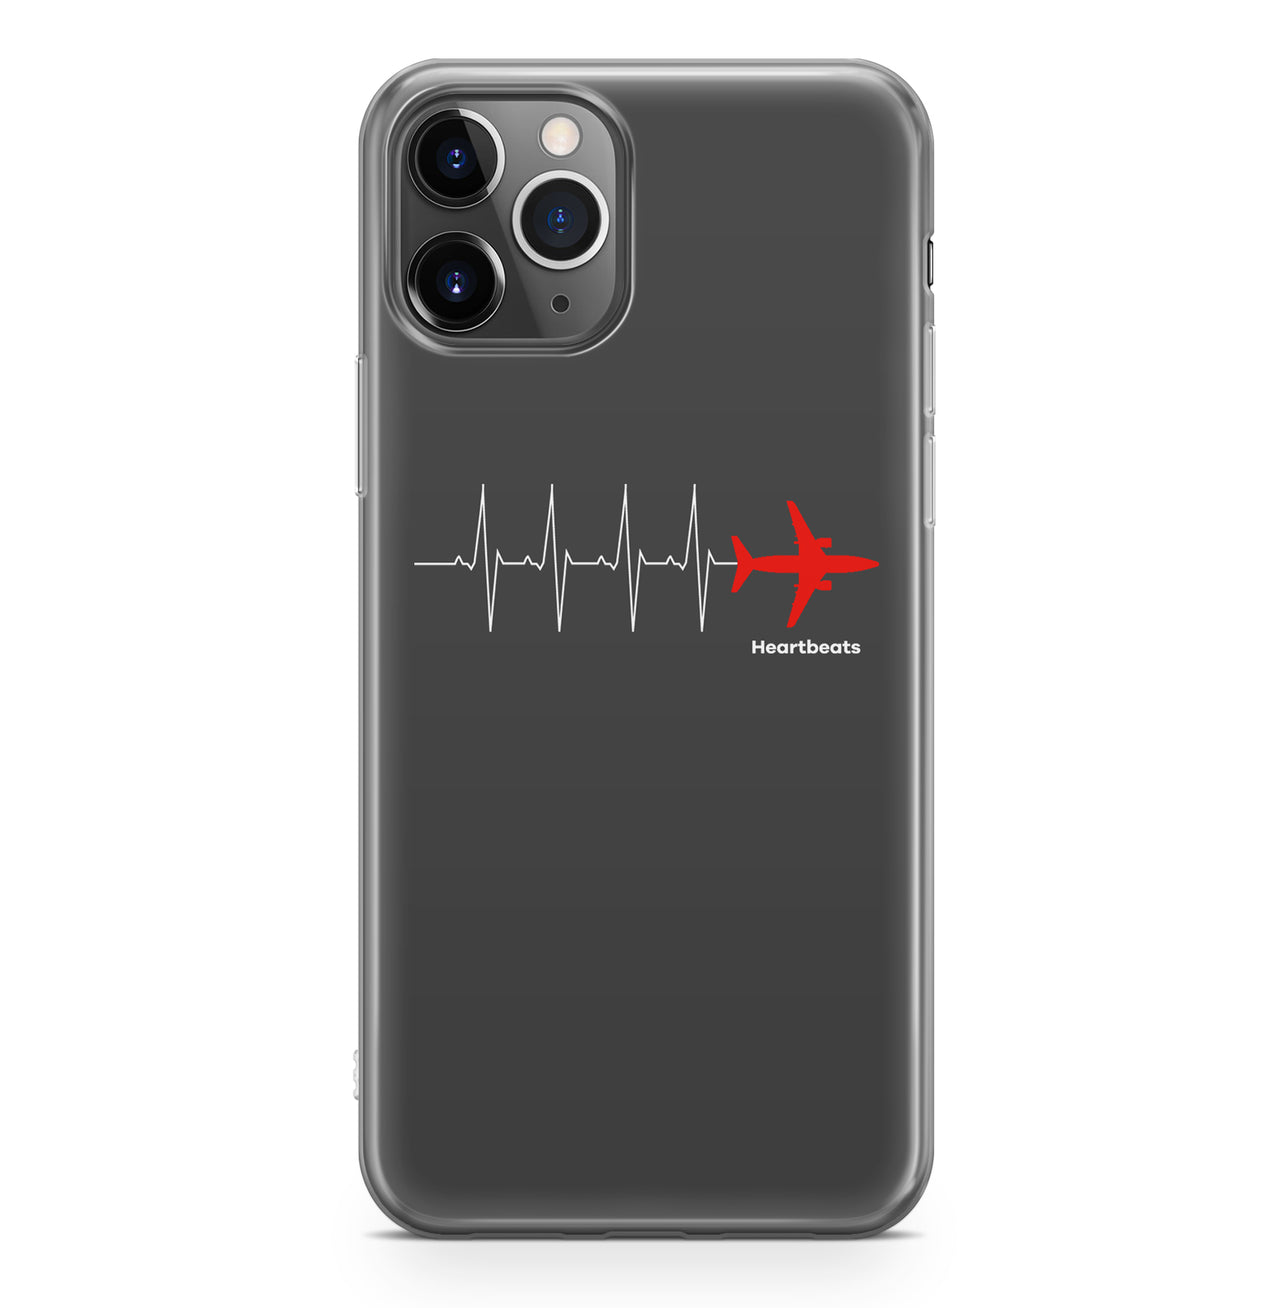 Aviation Heartbeats Designed iPhone Cases